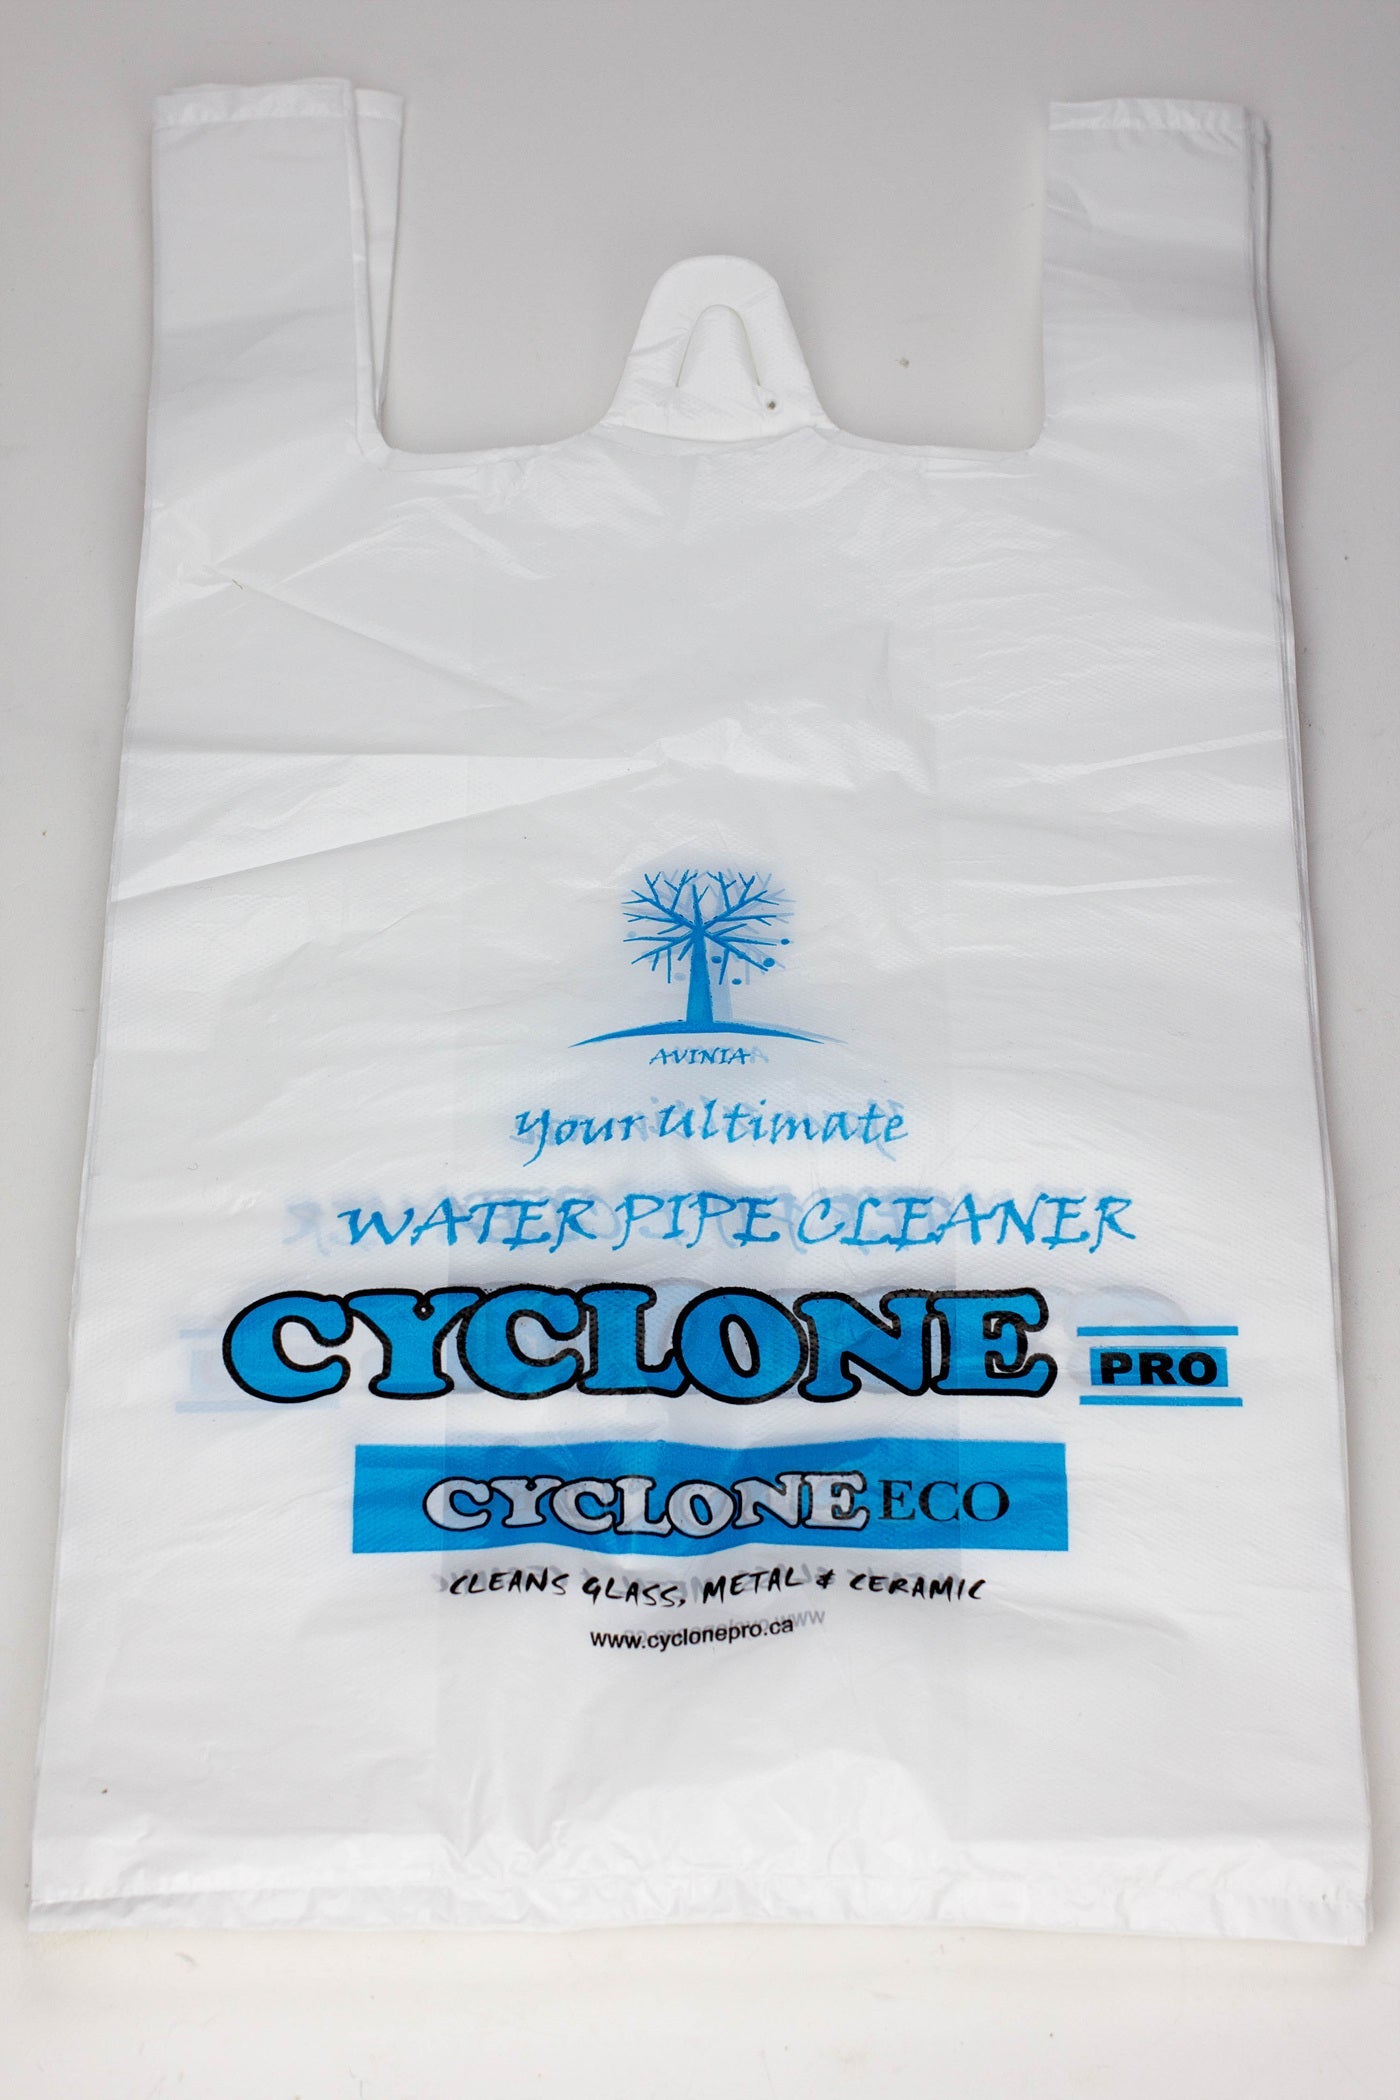 Cyclone Pro Water pipe cleaner_2